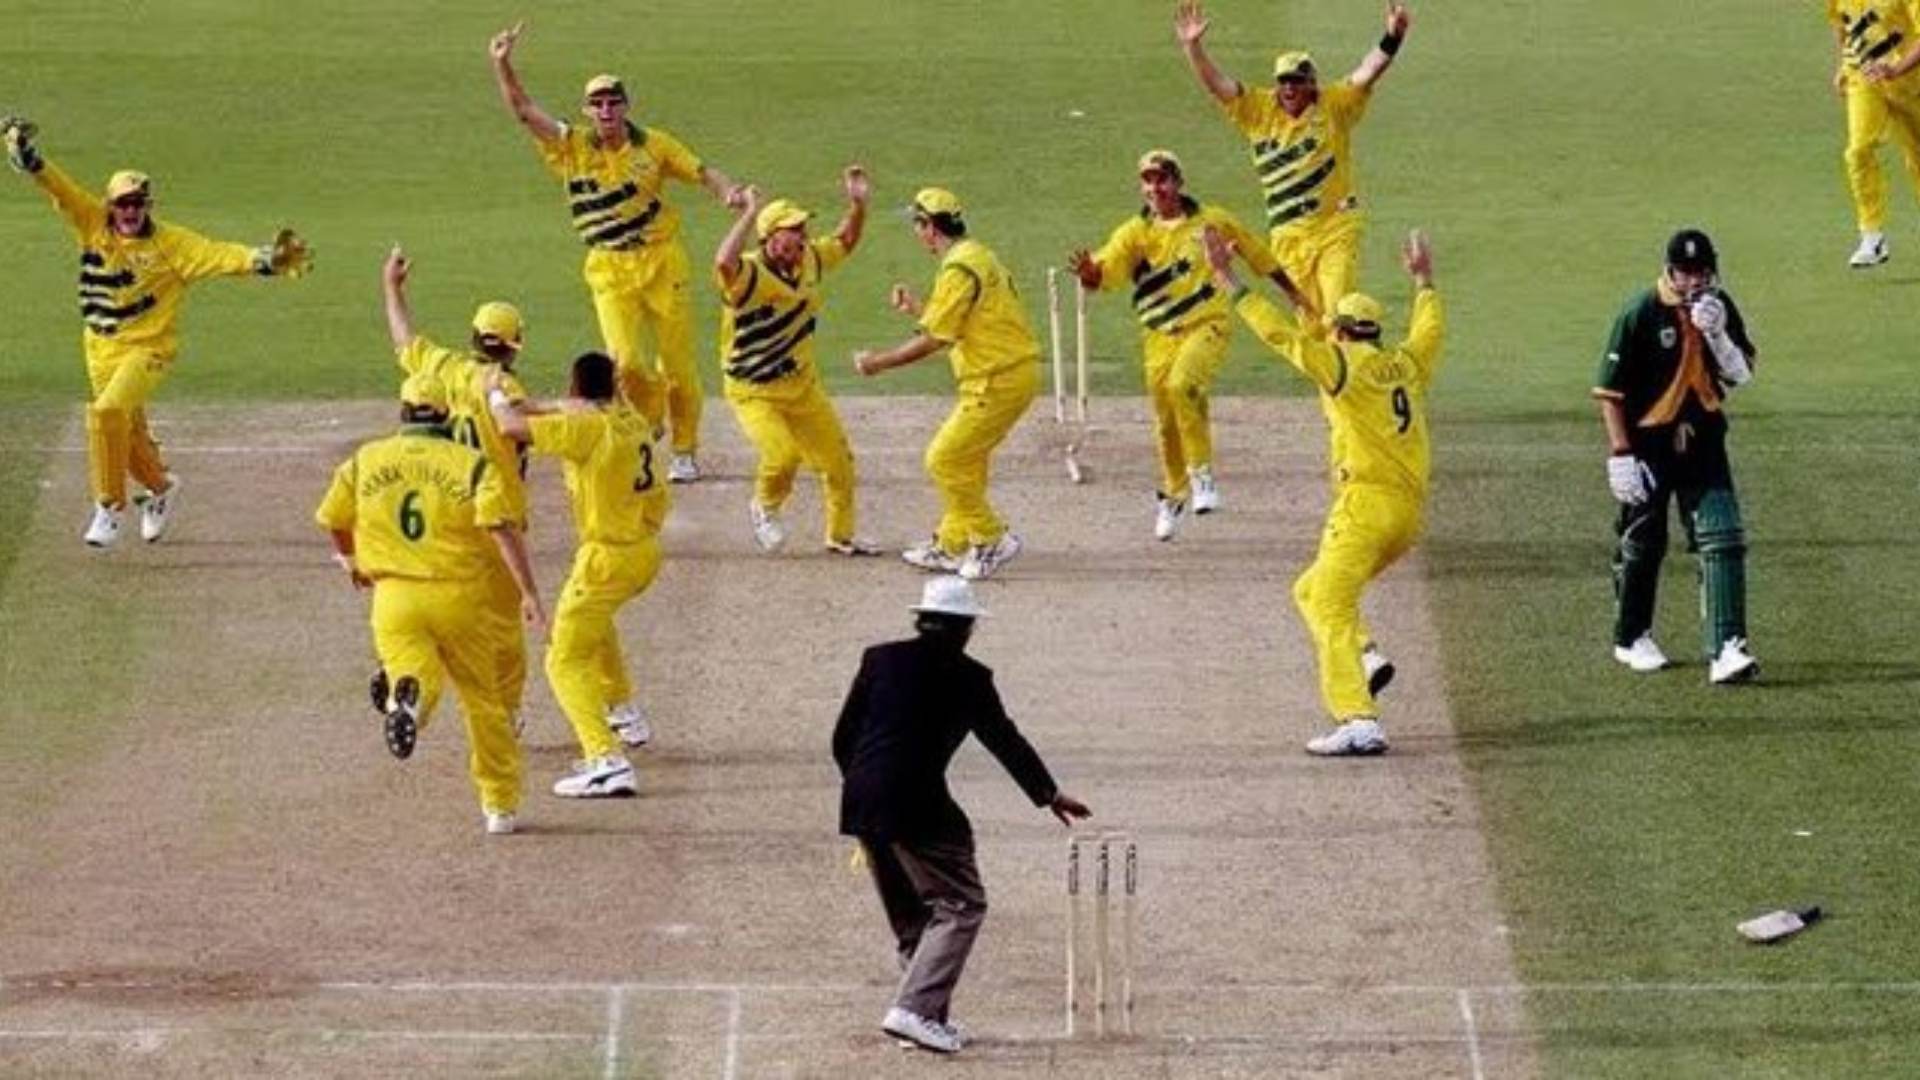 1999 Cricket World Cup semifinal produces a classic for the ages